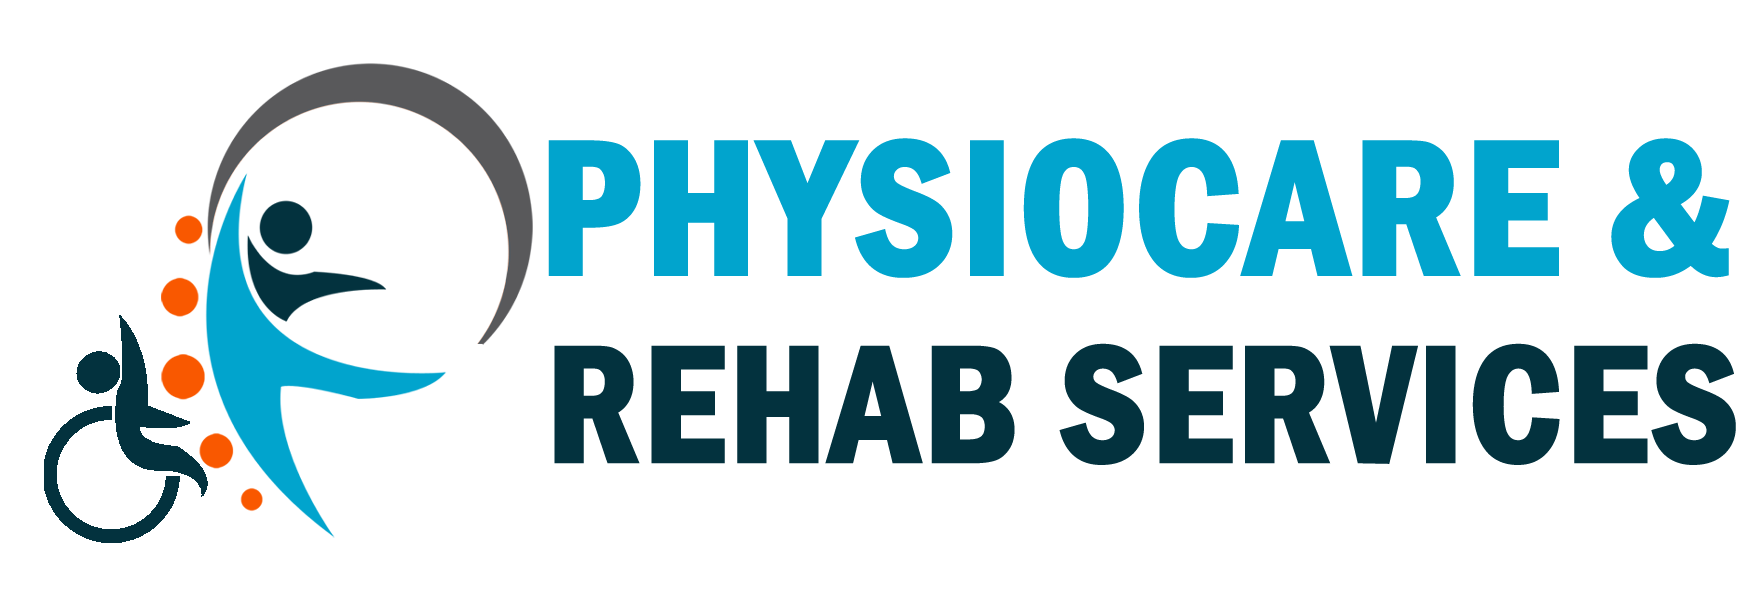 Physio Care and Rehab Services